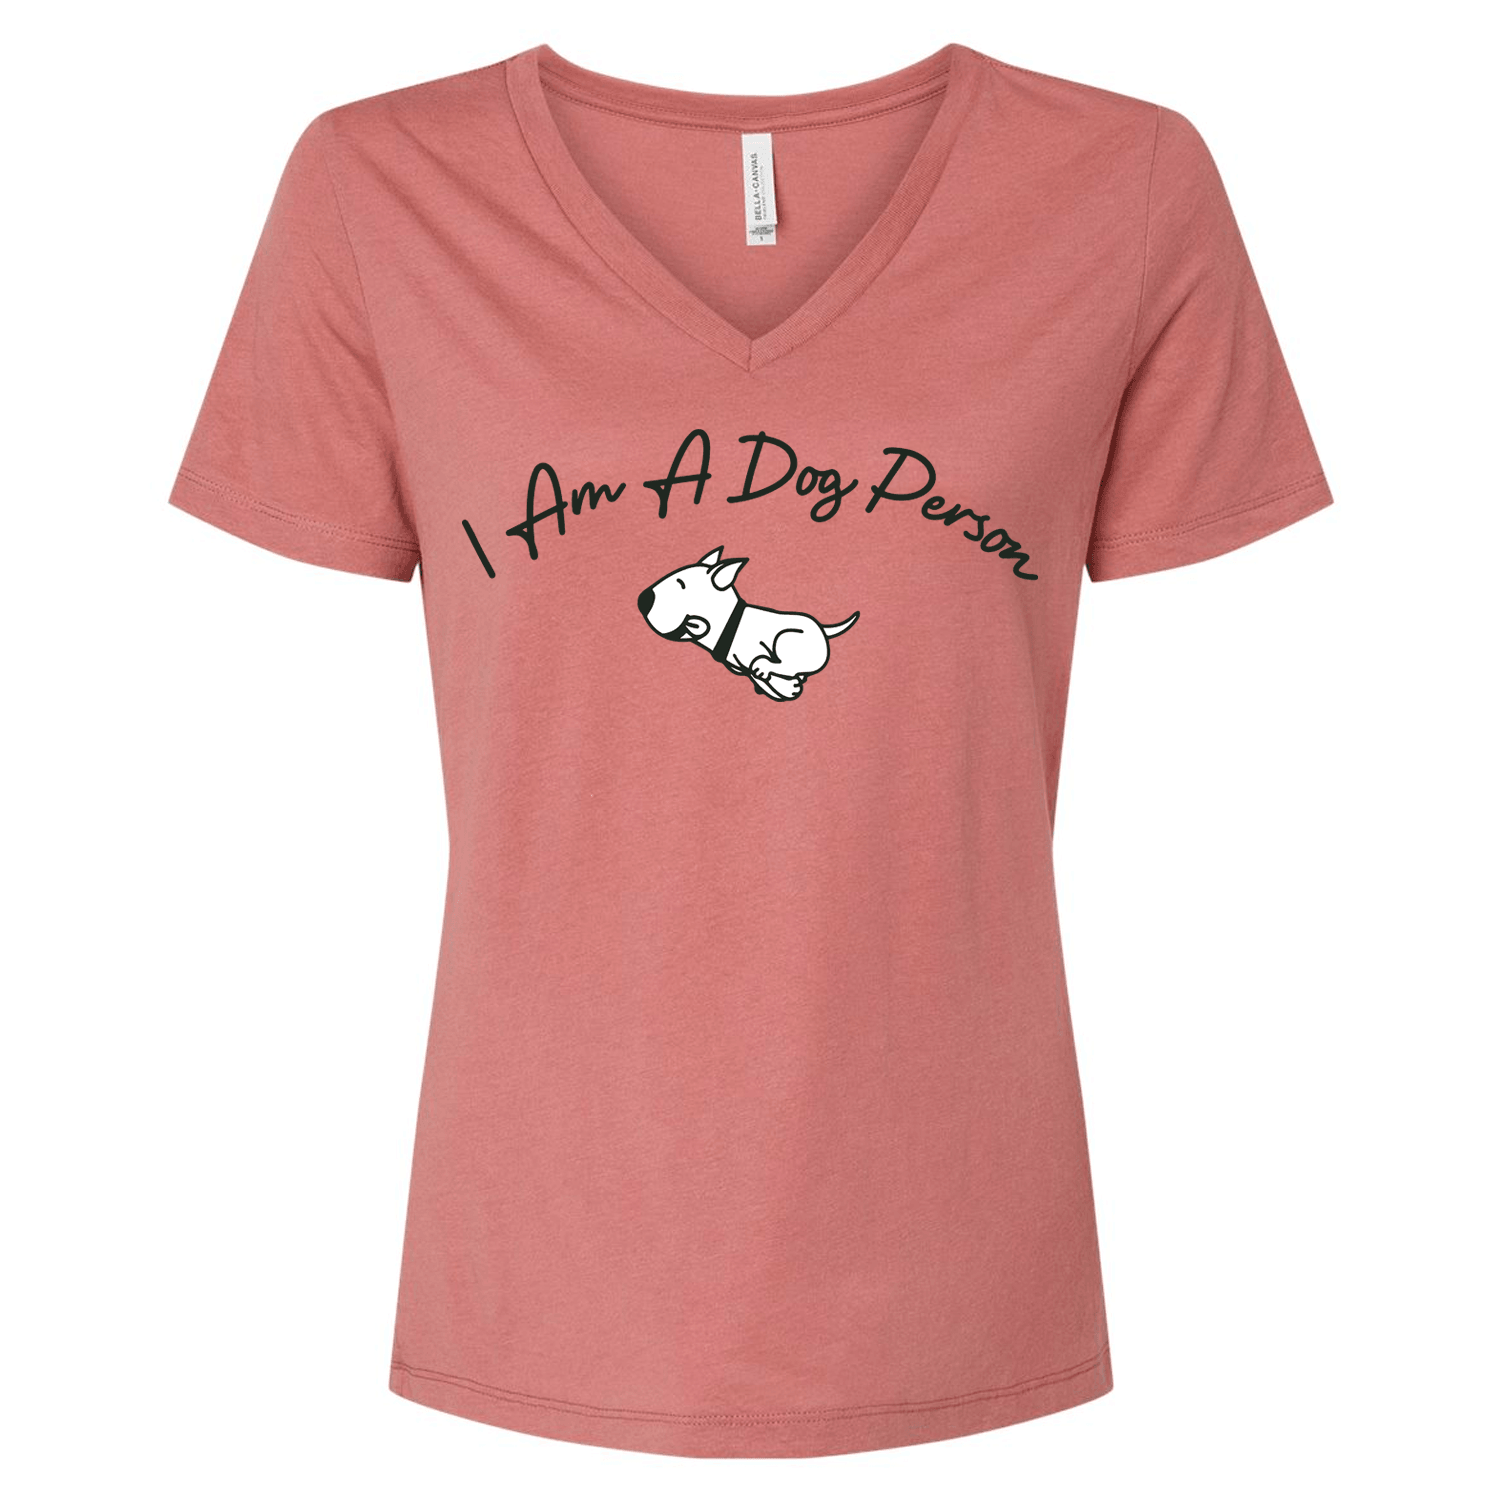 I Am a Dog Person V Neck - Ales to Trails